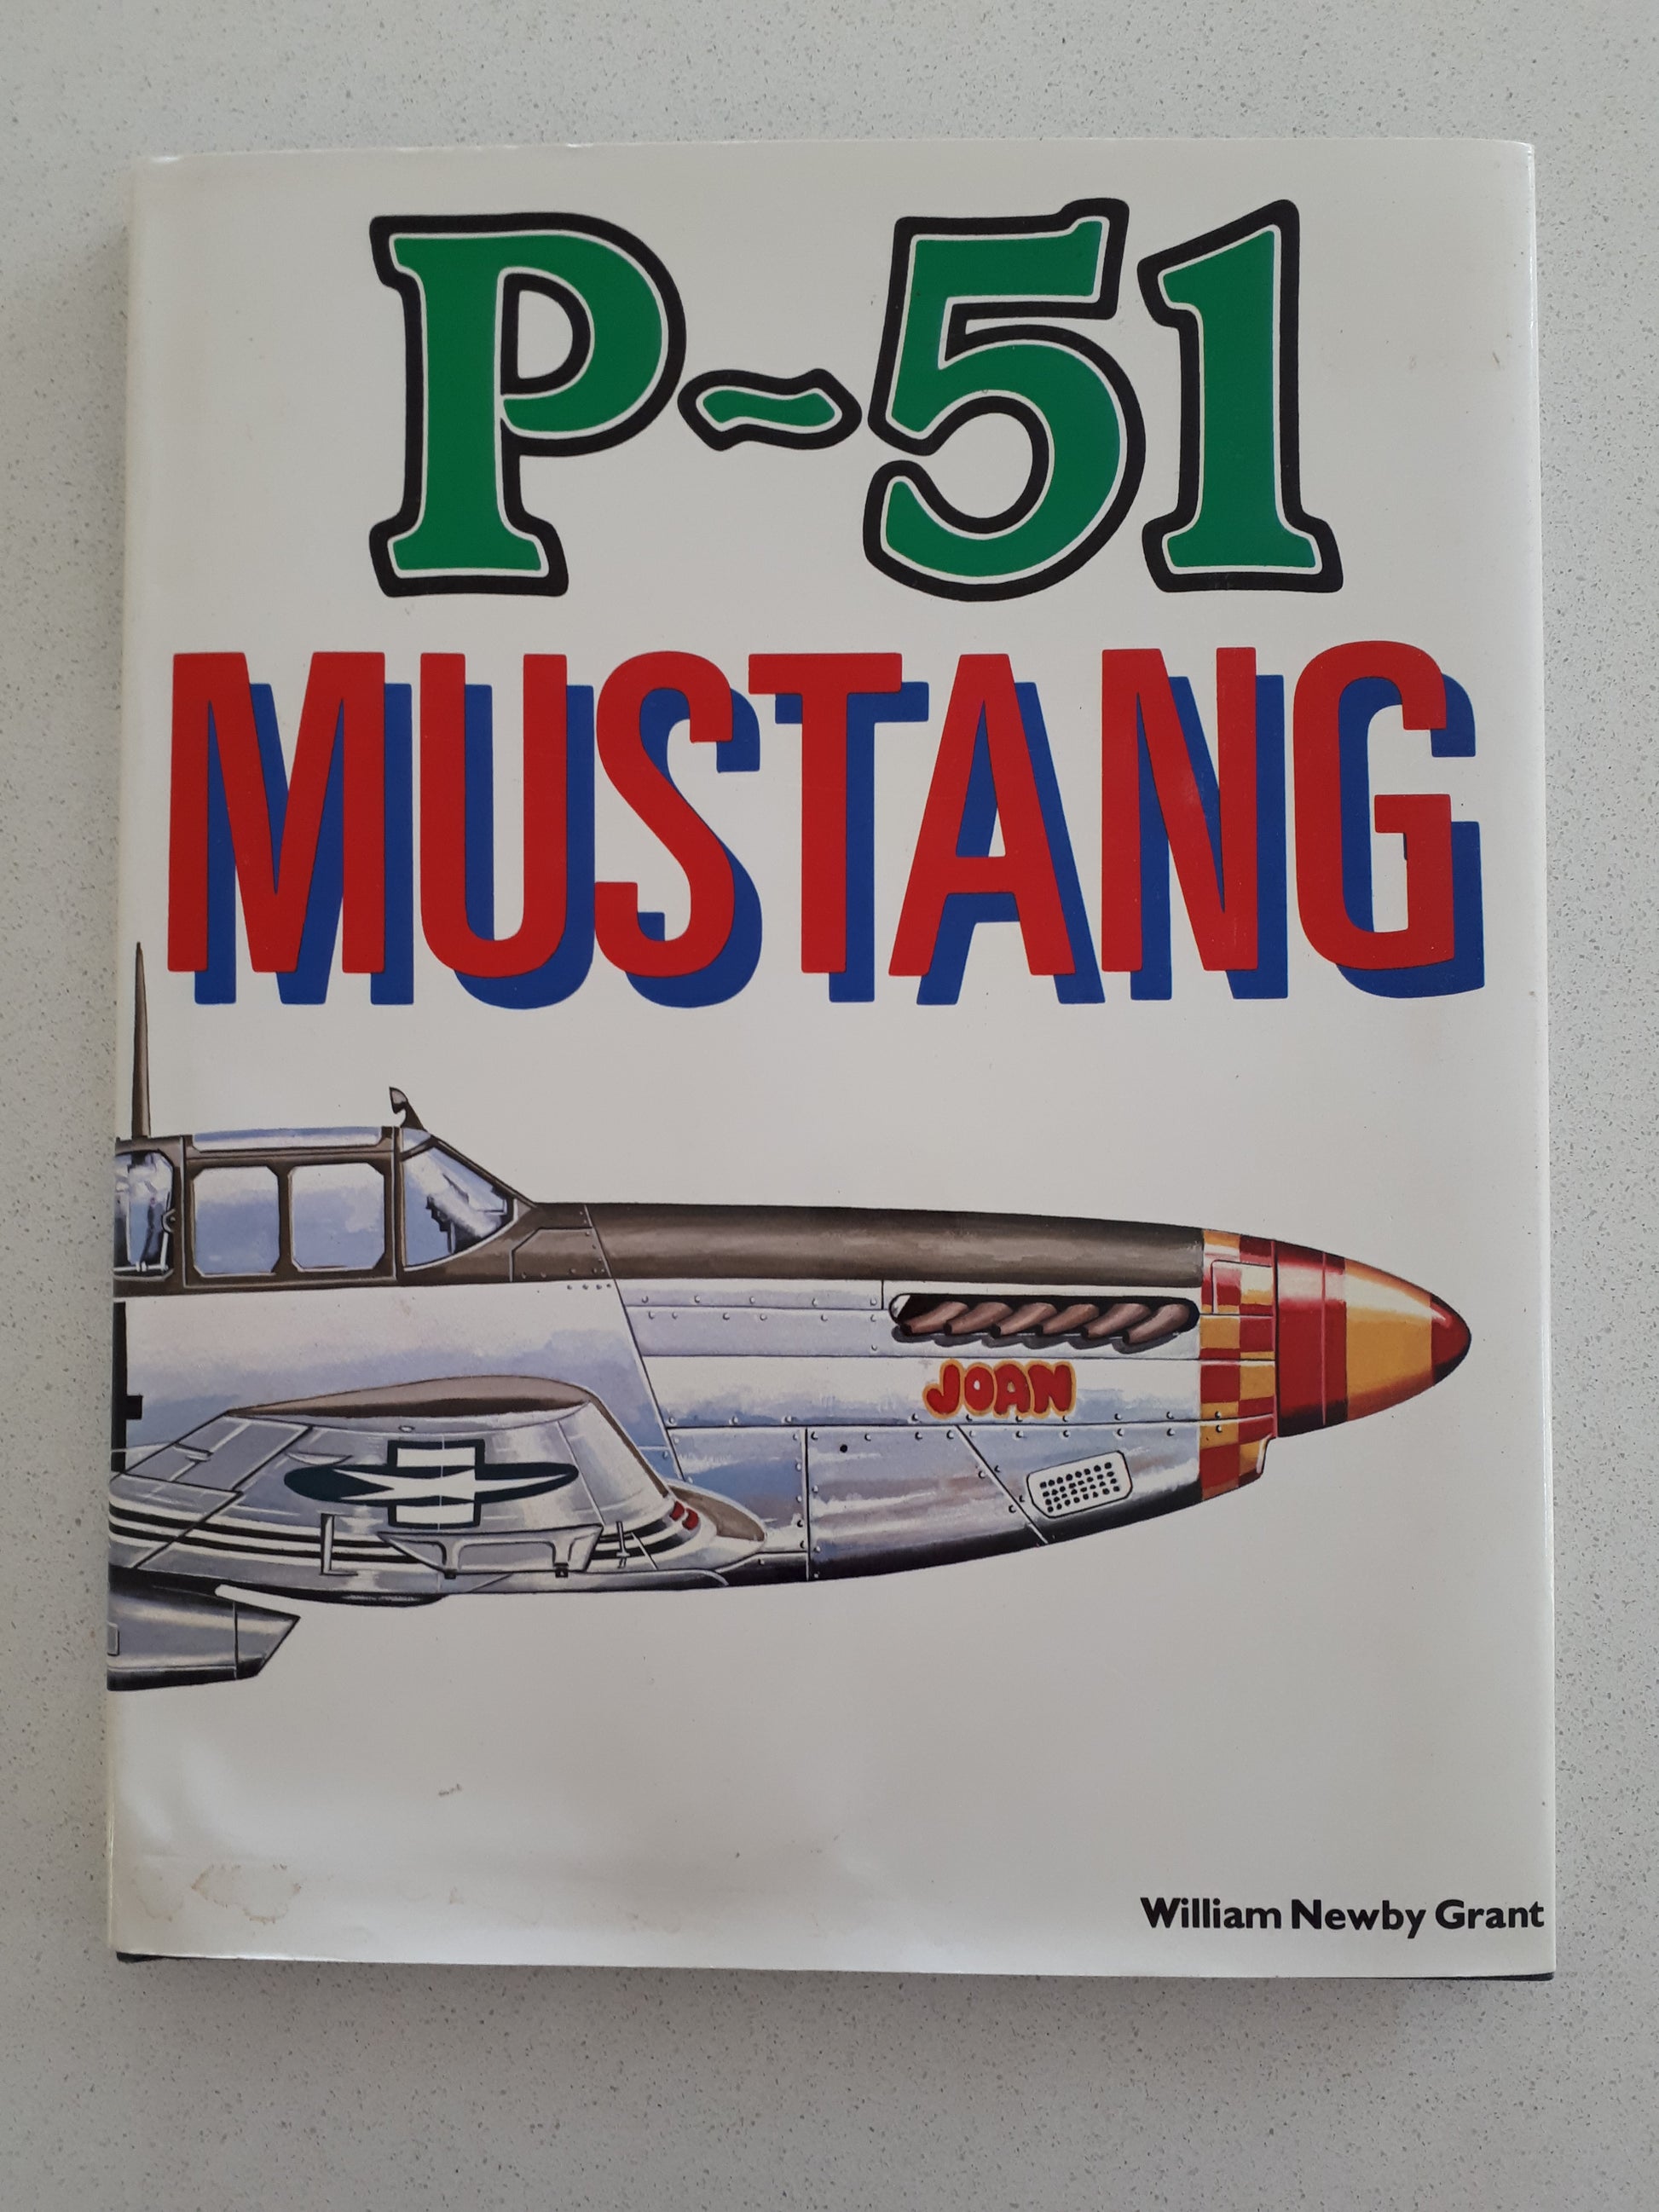 P-51 Mustang  by William Newby Grant